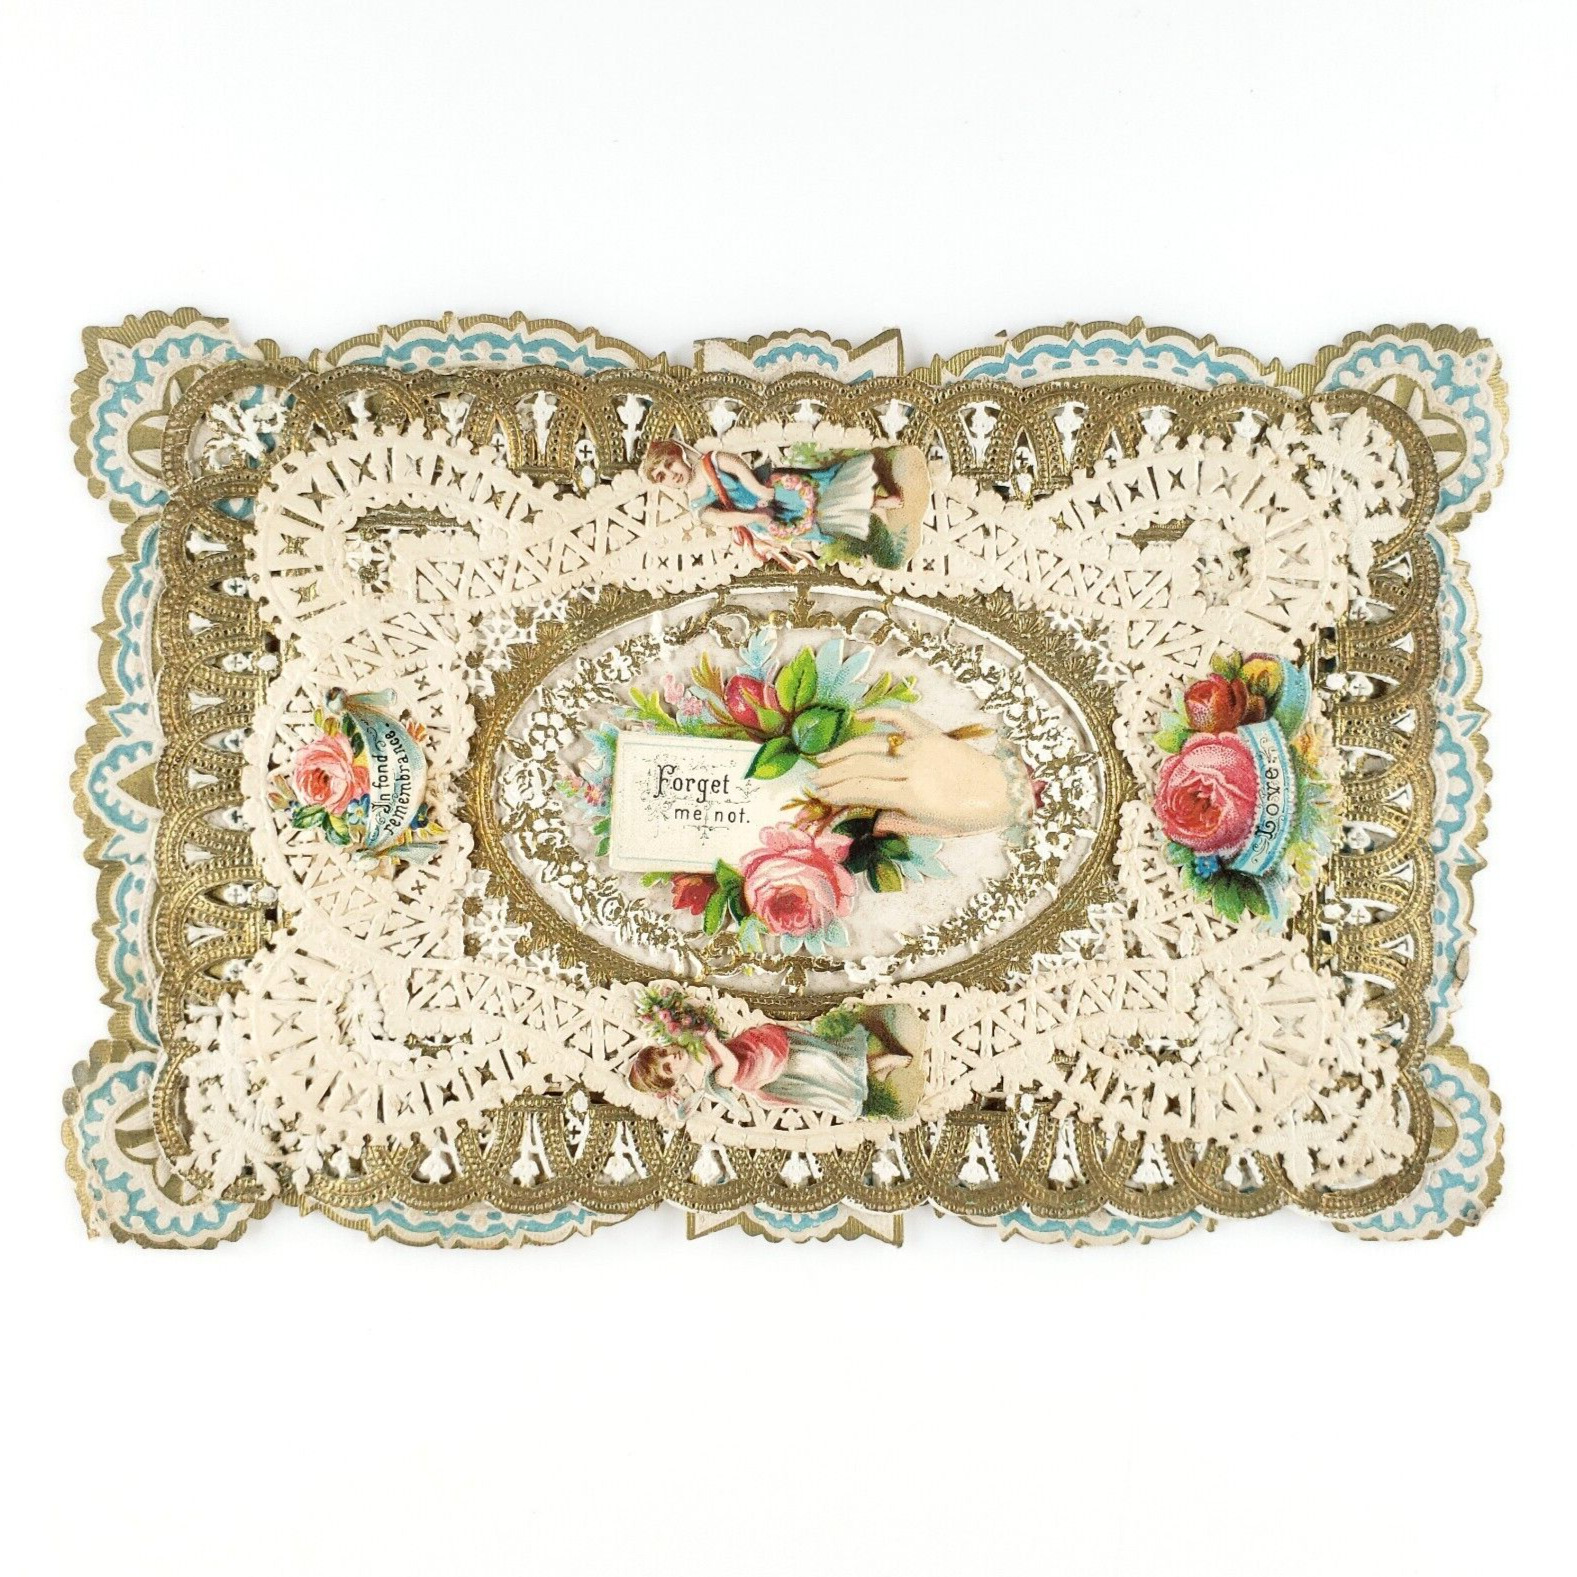 Forget Me Not Flowers Valentine Card c1895 Paper Lace Floral Rose Love Art B439